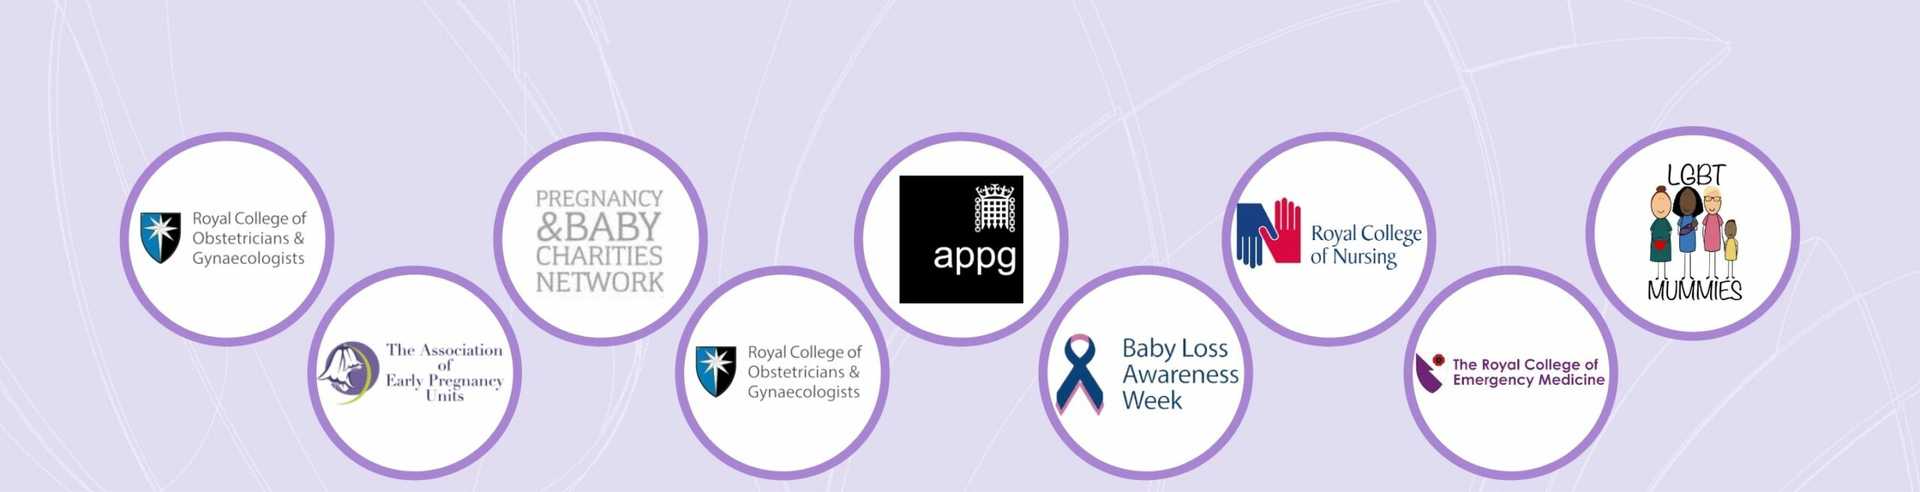 Logos for networks The Ectopic Pregnancy Trust collaborates with on a purple banner background